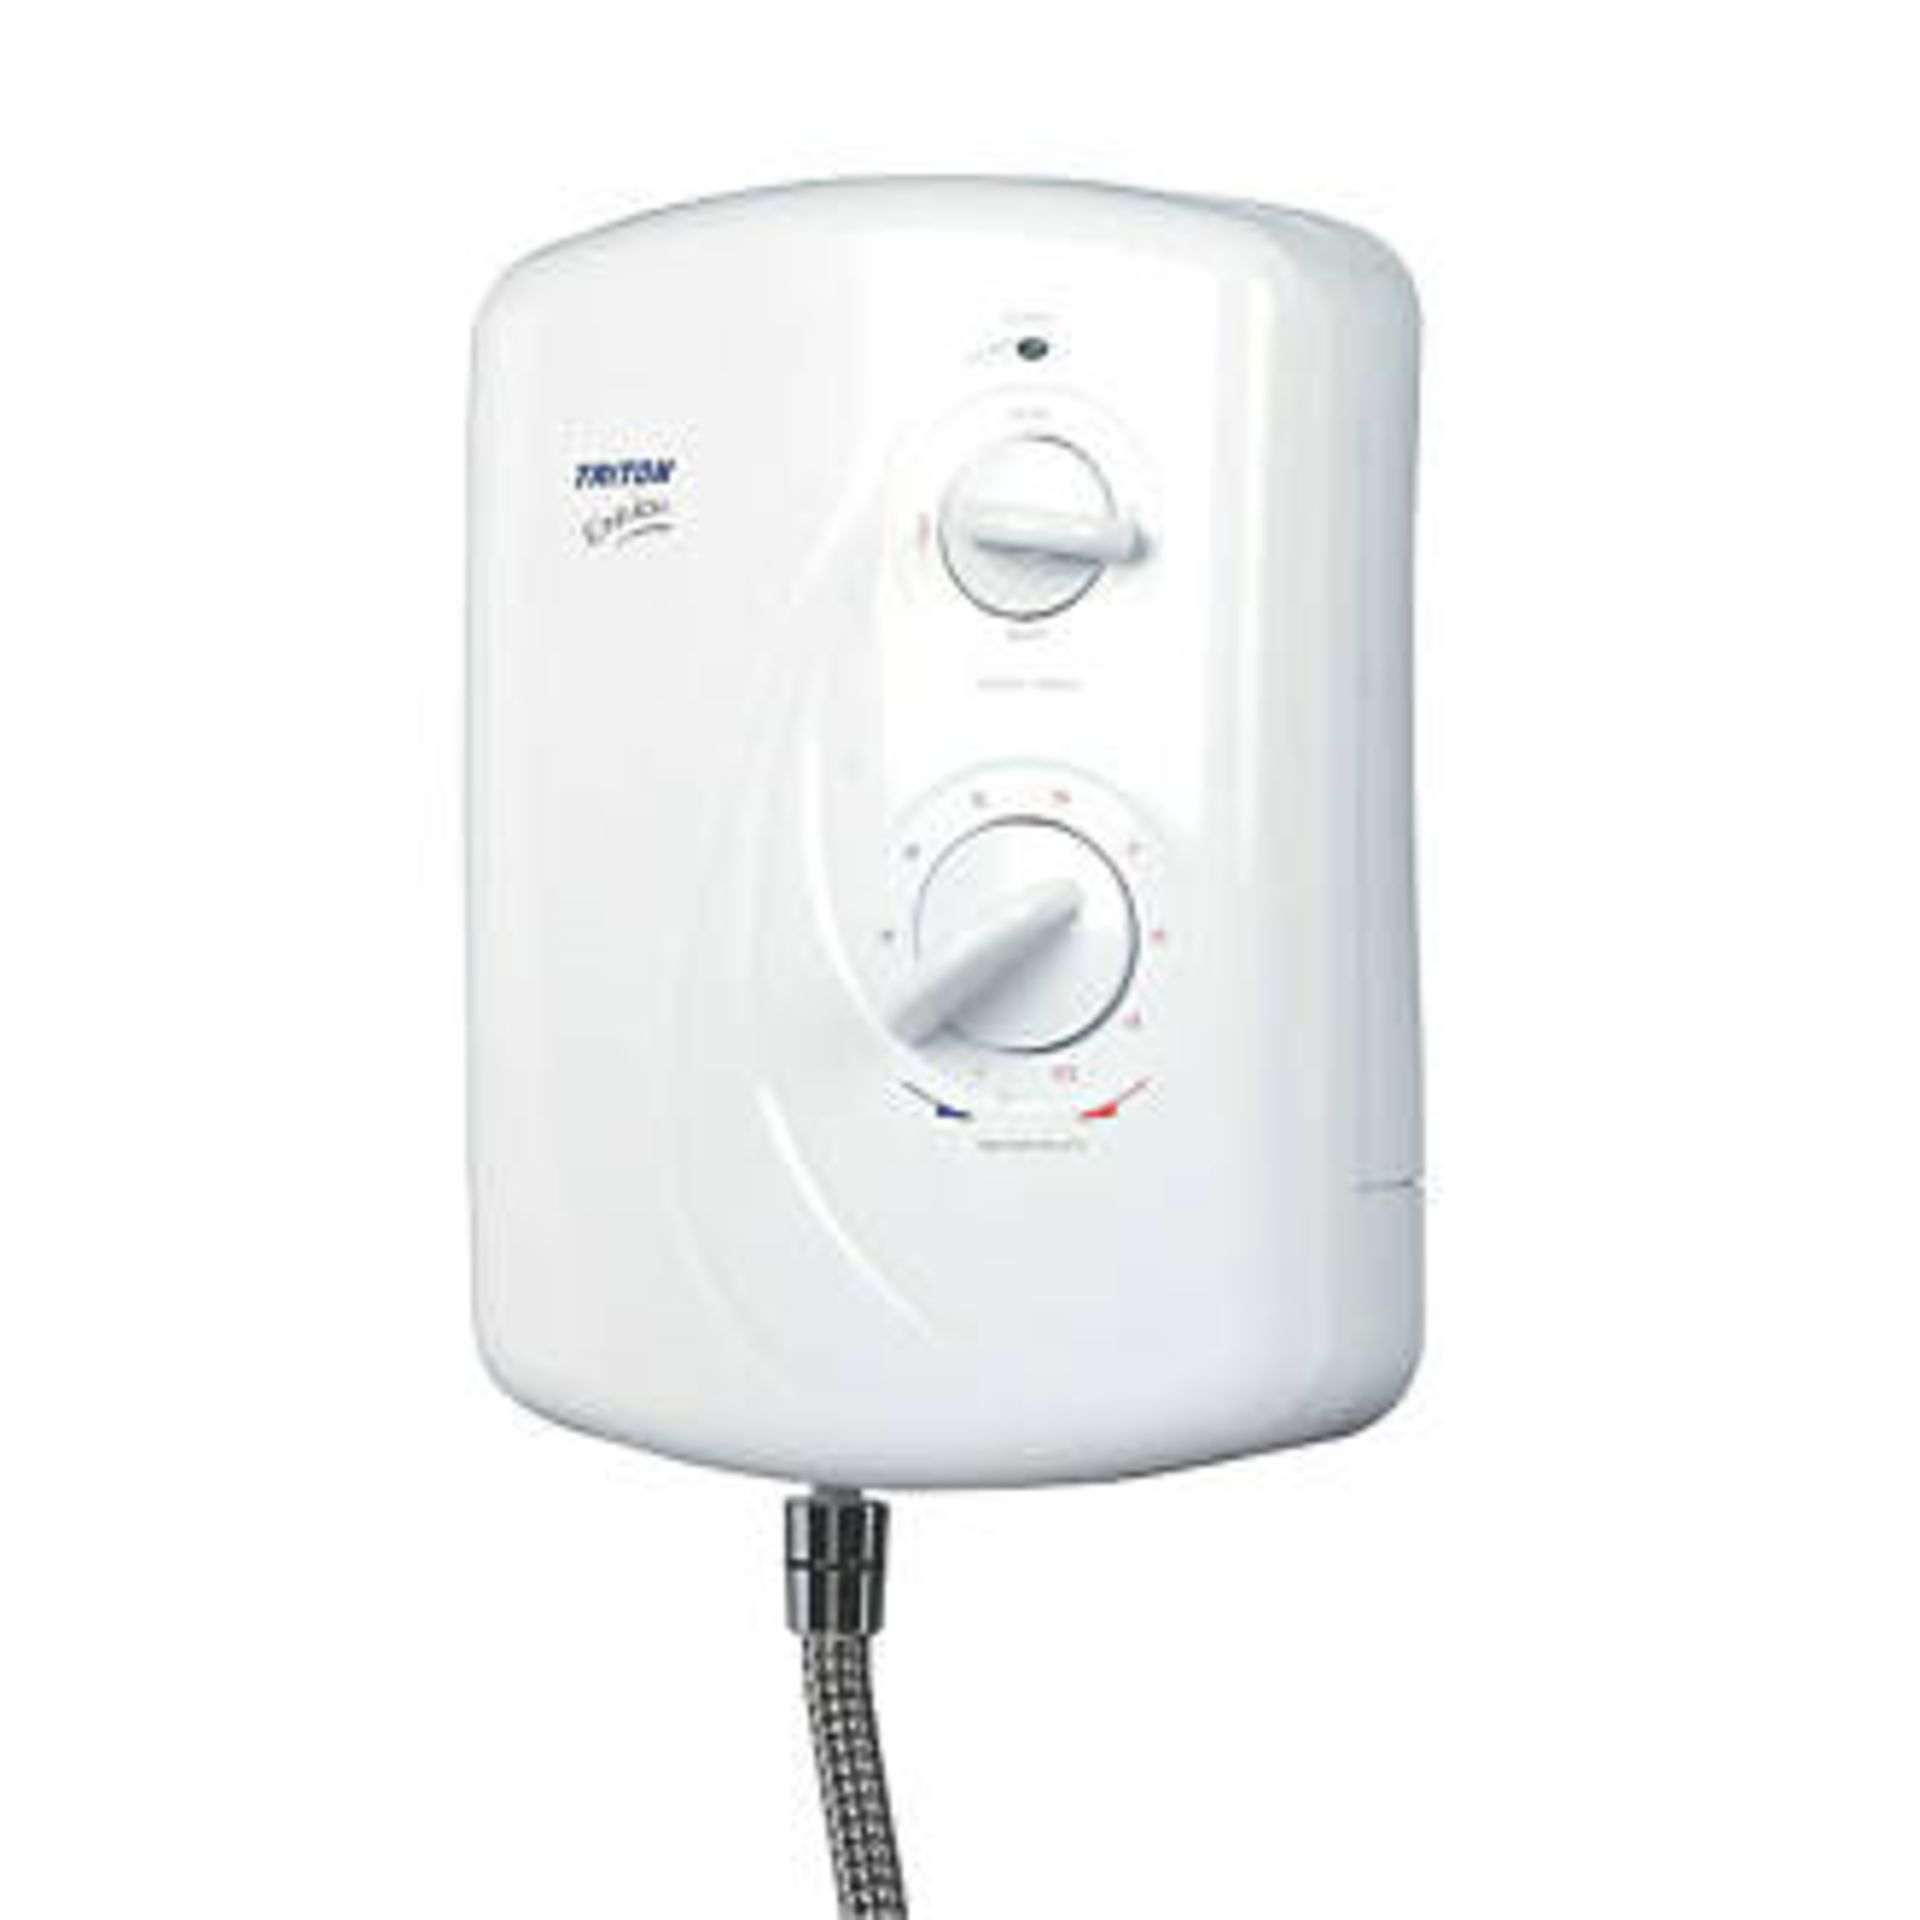 (XL78) Triton Enrich White 8.5kW Manual Electric Shower. A great value unit that is easy to use...( - Image 3 of 3